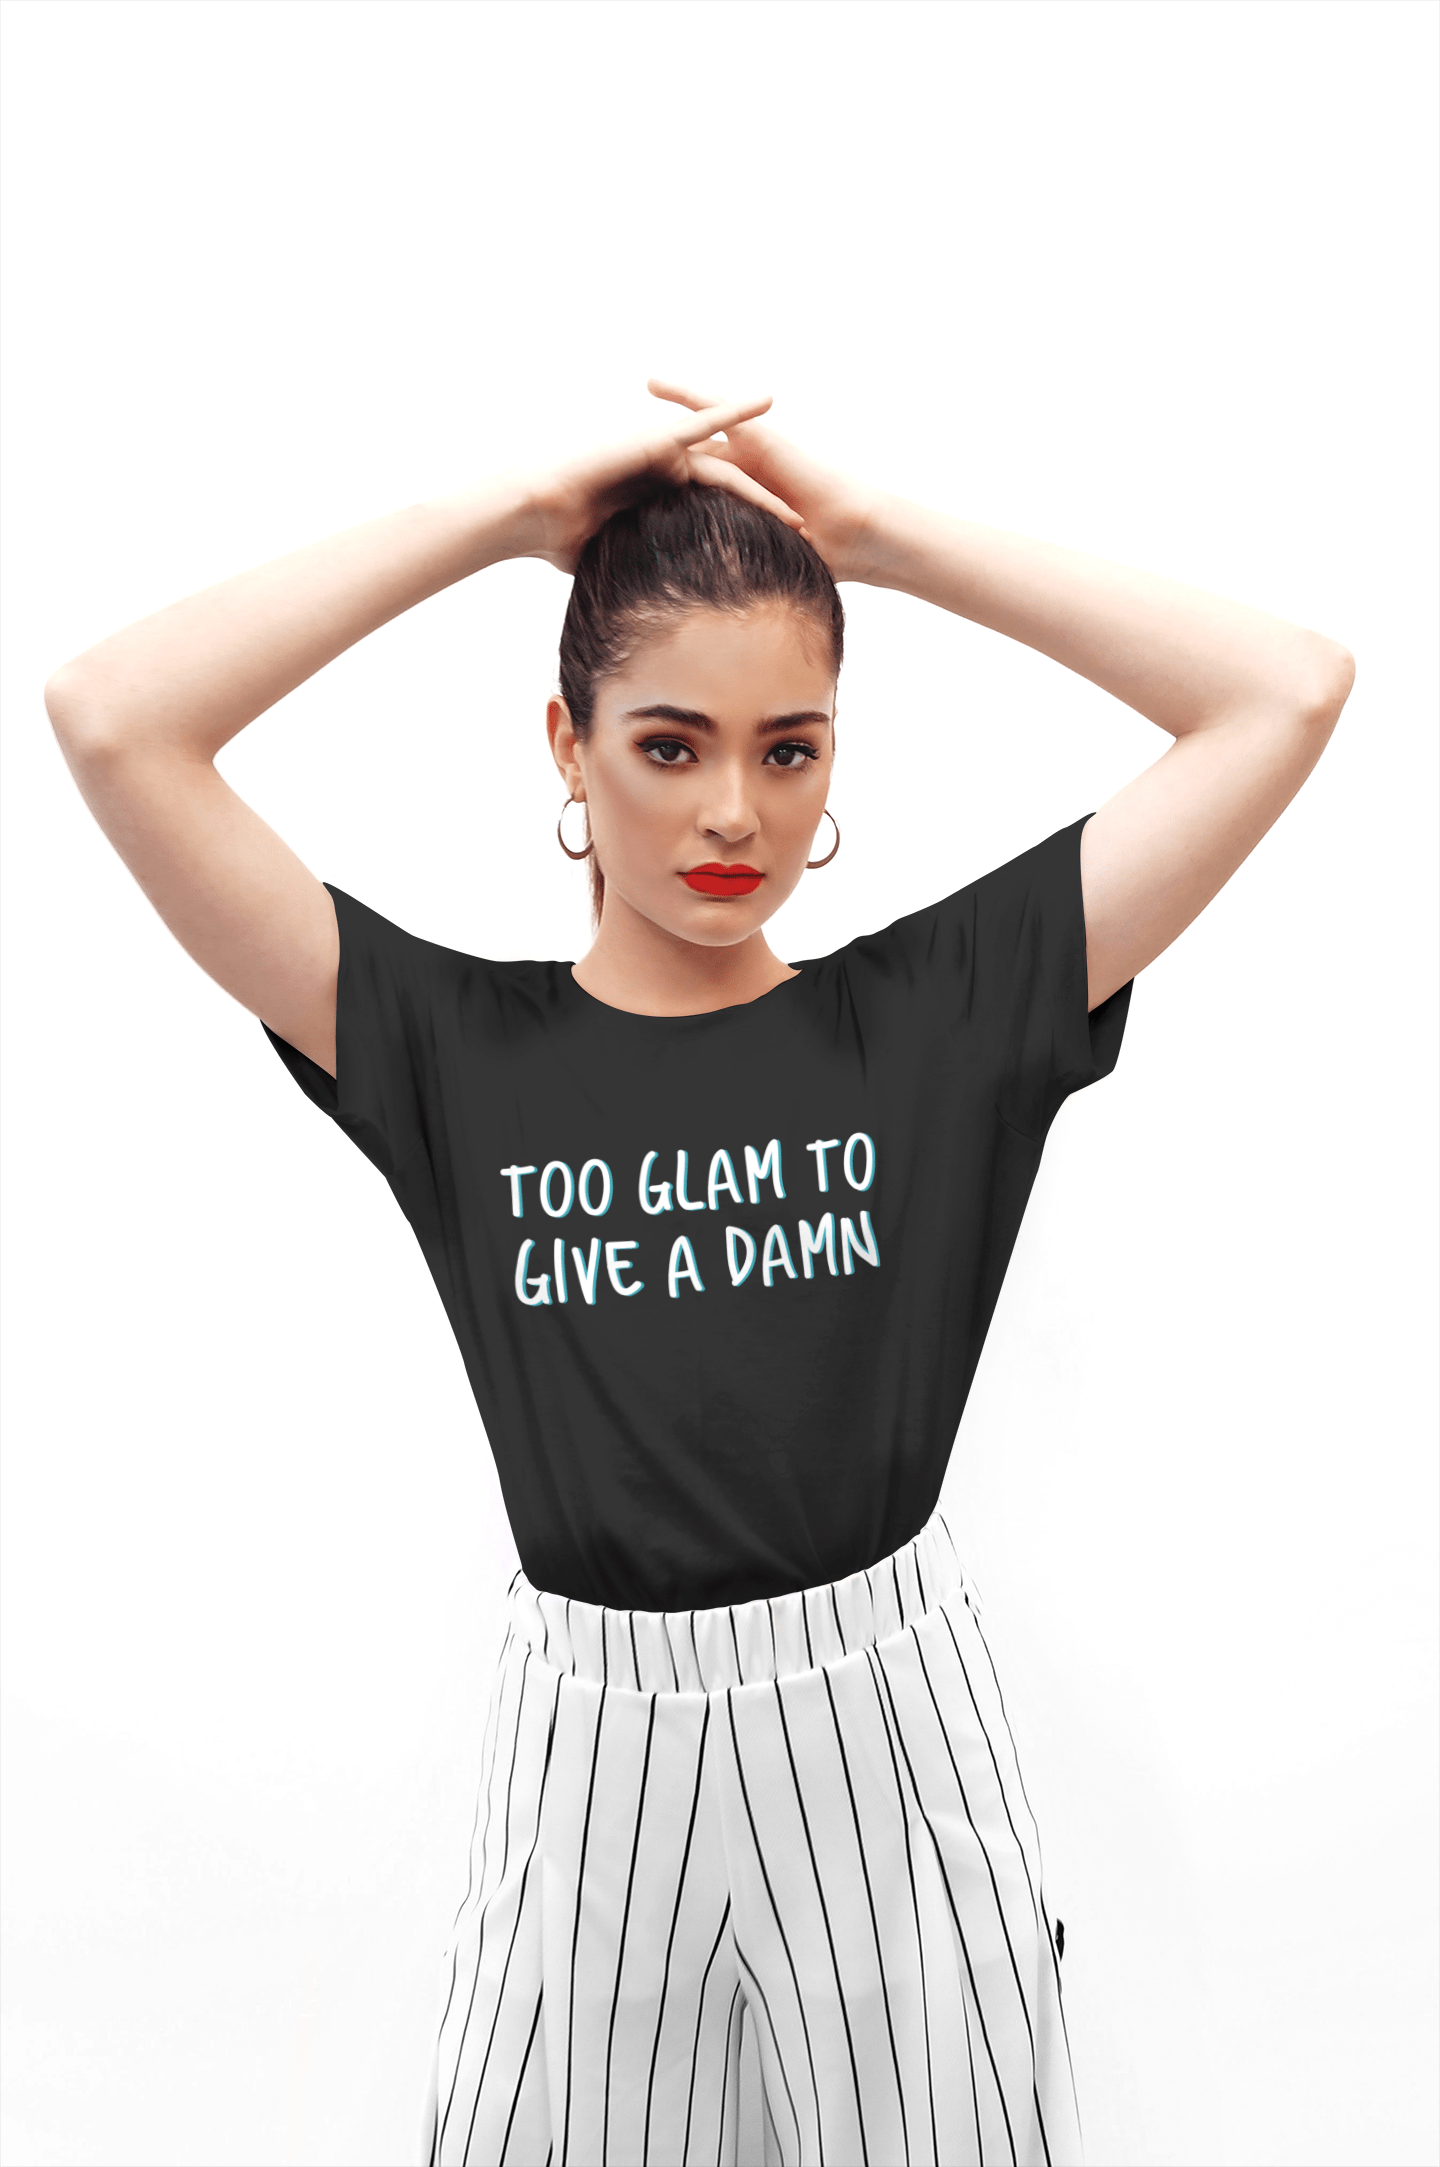 " TOO GLAM TO GIVE A DAMN " - HALF-SLEEVE T-SHIRTS